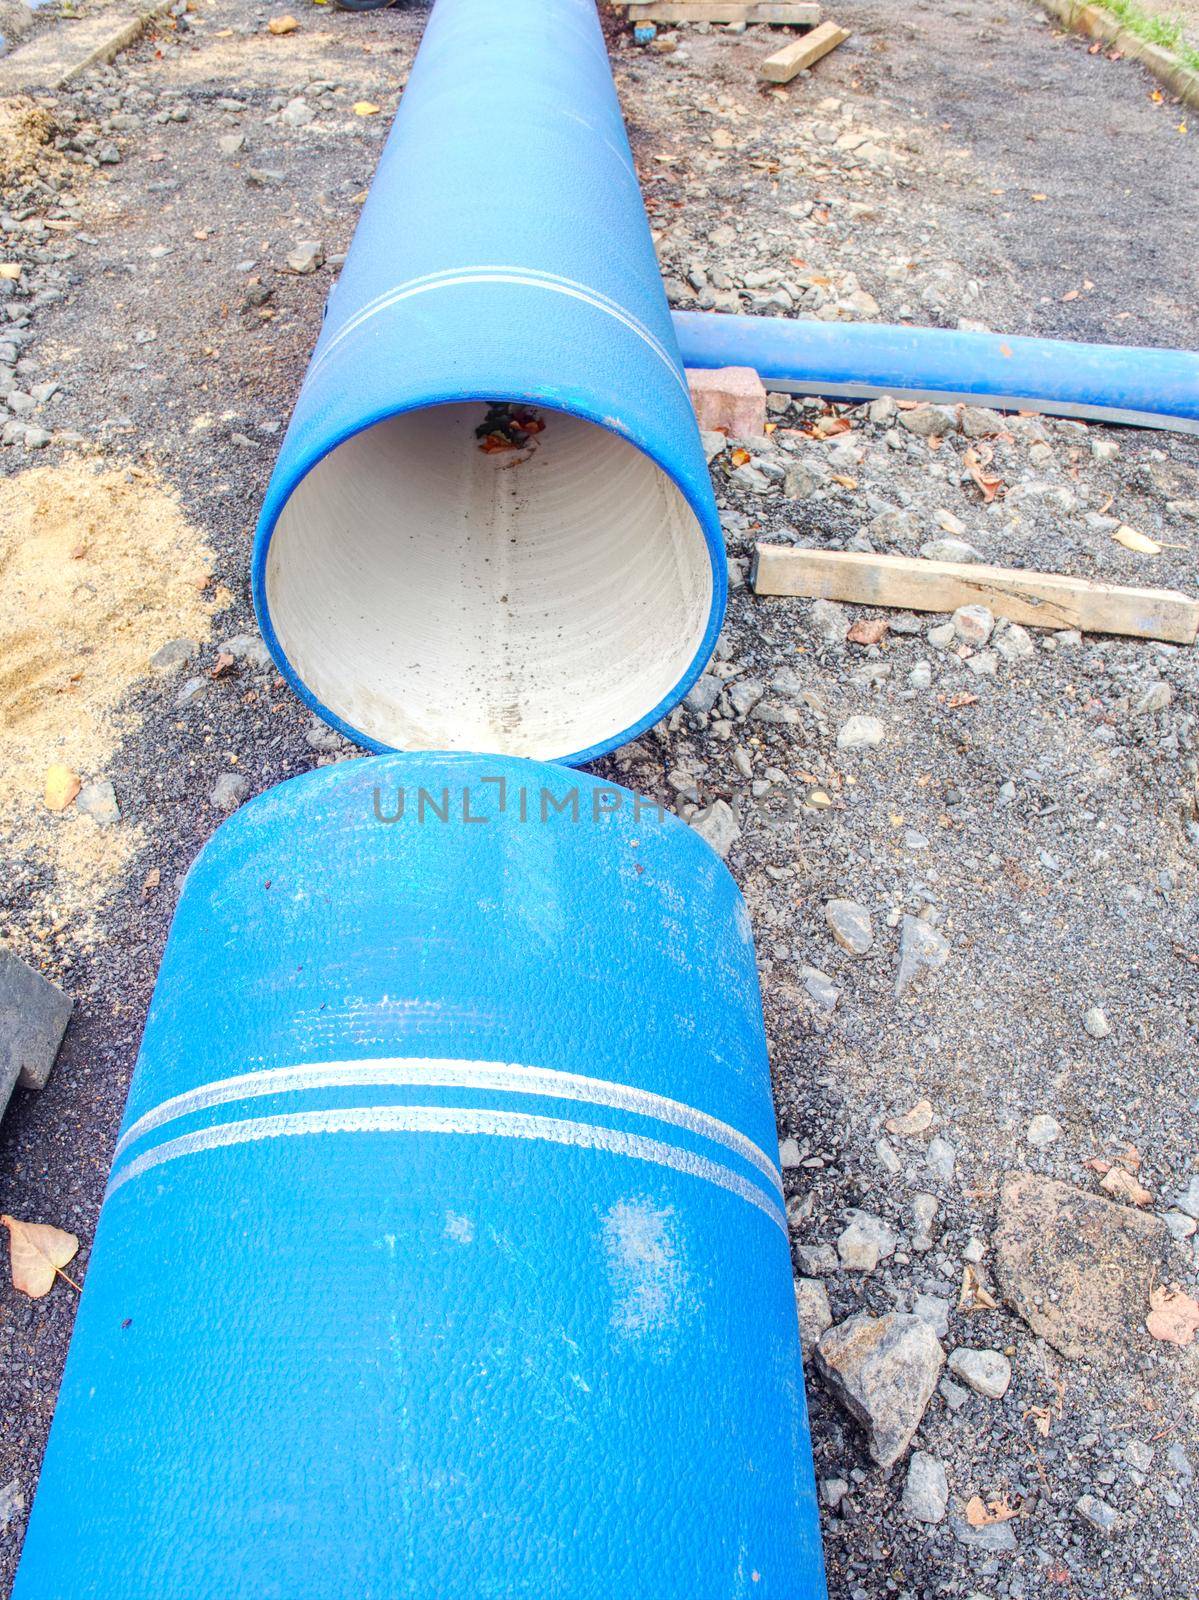 HDPE pipe ready for welding. City underground pipes by rdonar2